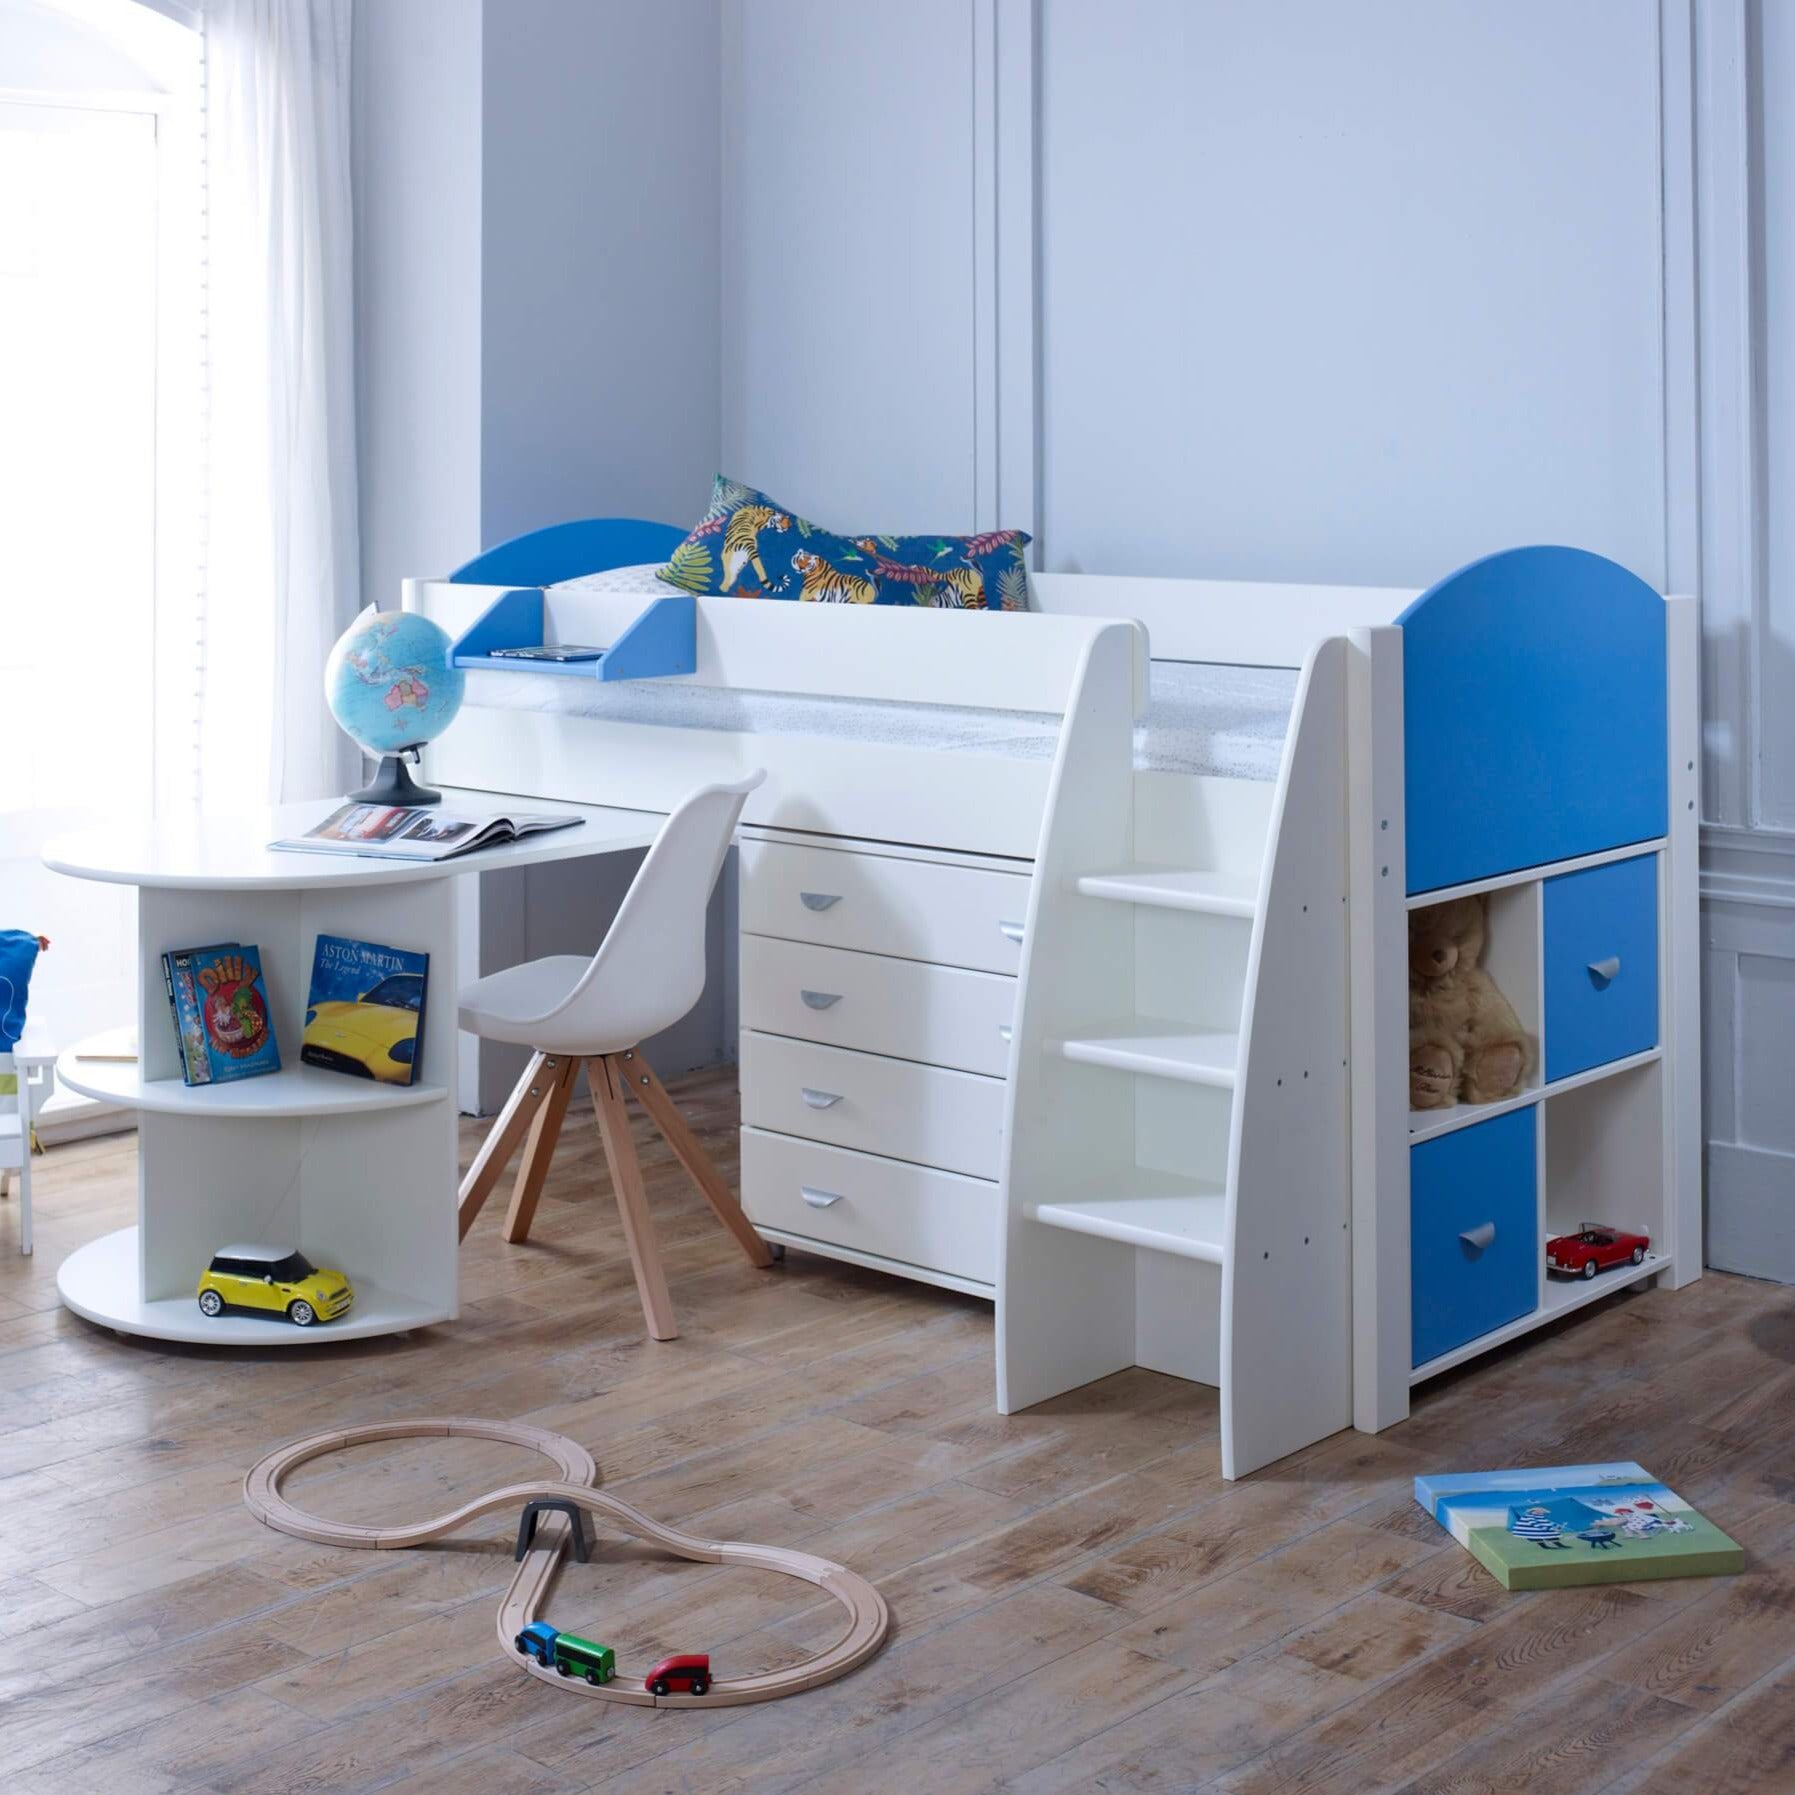 Evan Sky Blue Mid Sleeper Bed with Pull Out Desk, Drawers & Optional Storage - Desk Out